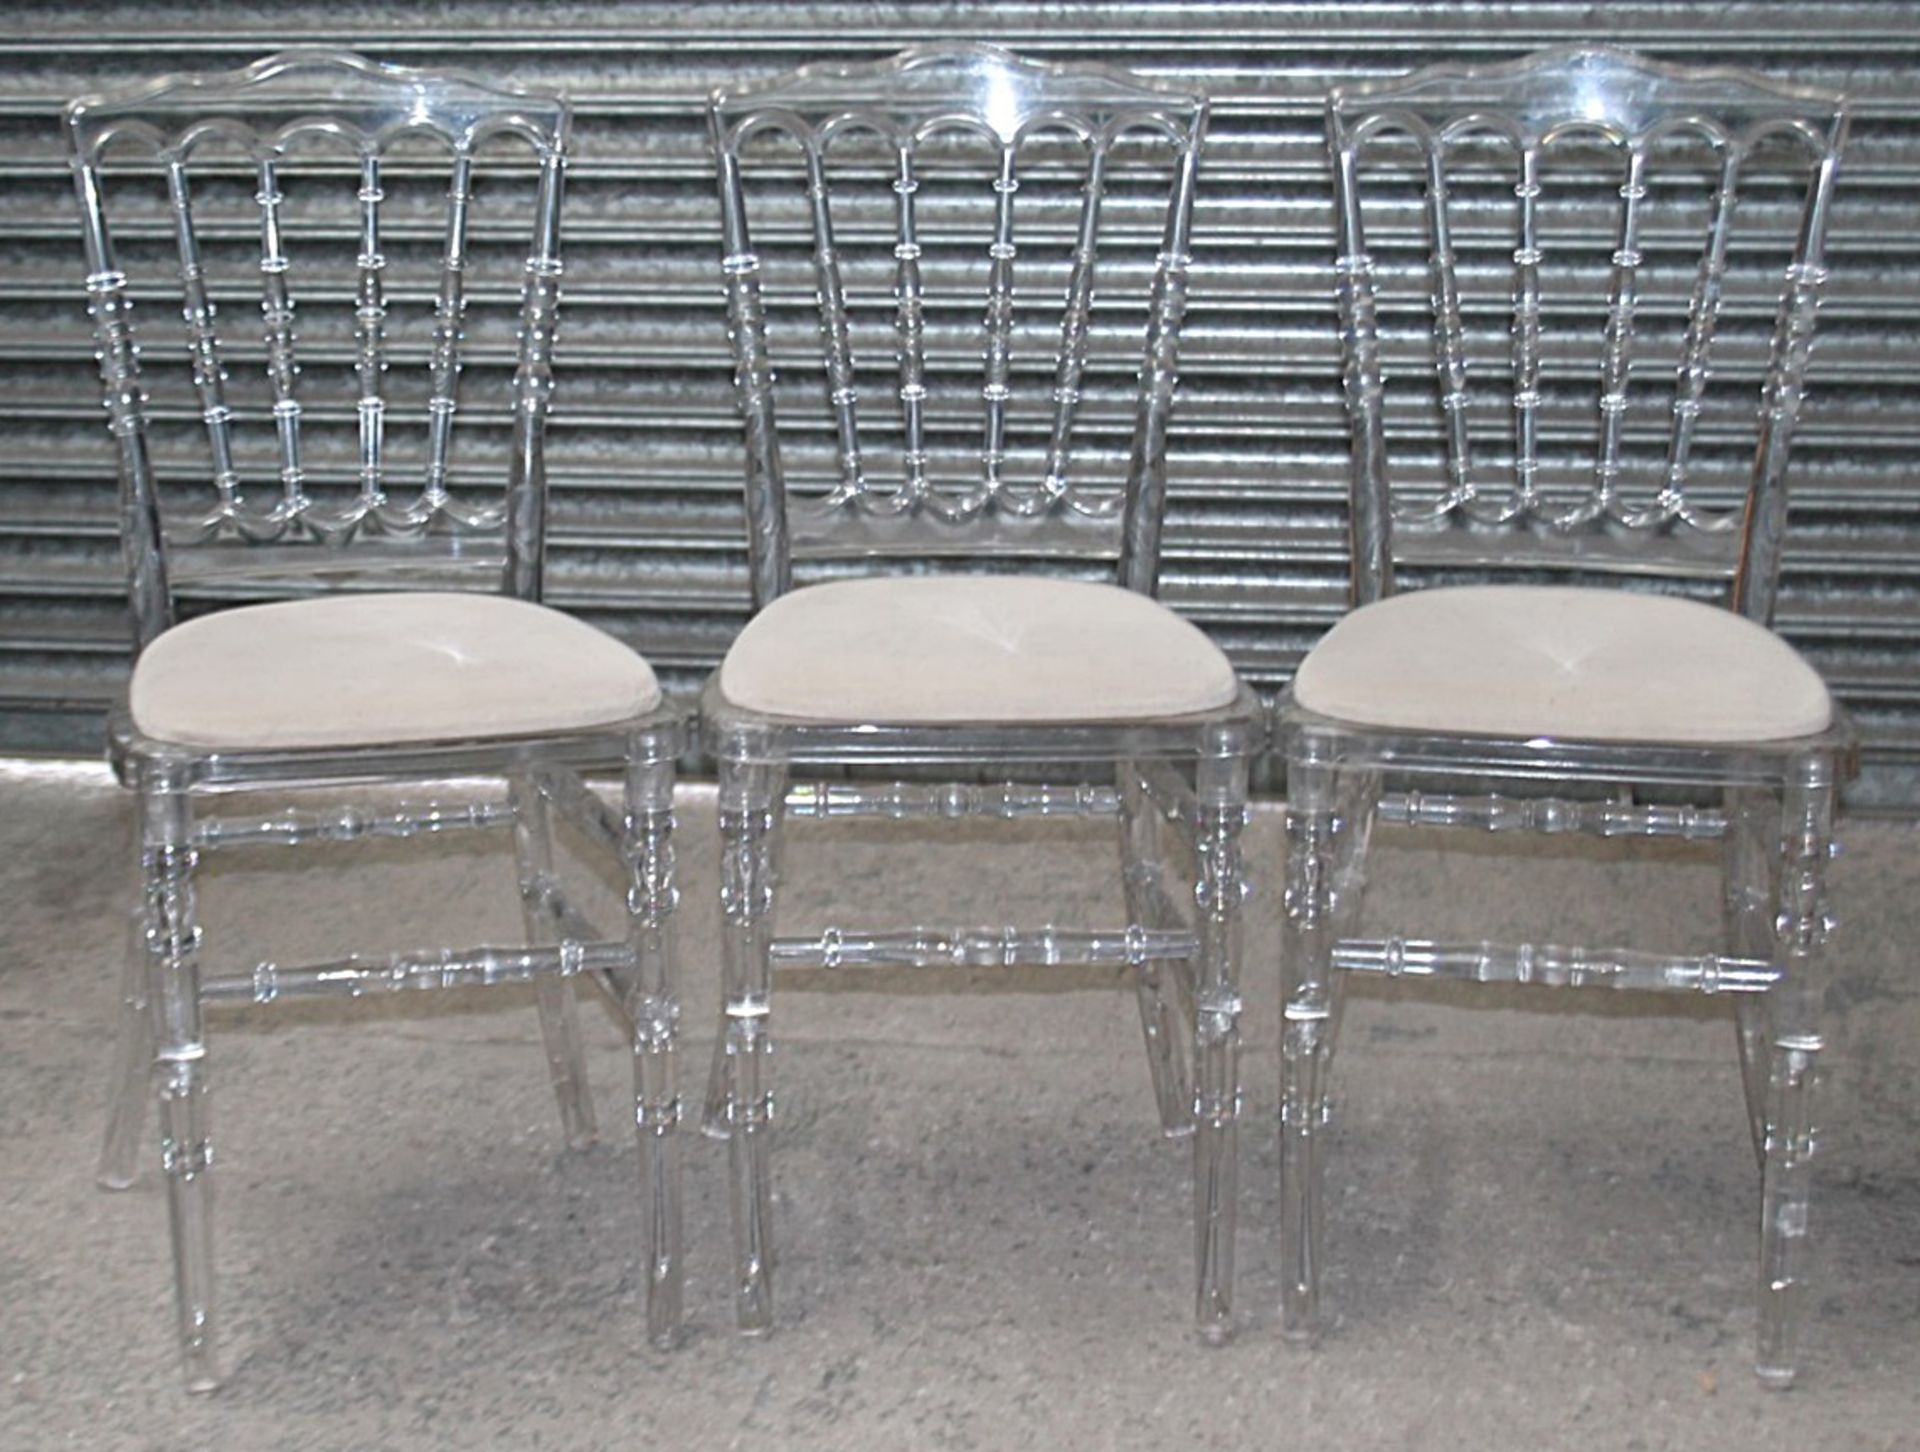 10 x High Quality Clear Acrylic Spindle Back Commercial Dining Chairs With Removable Seat Pads - Image 4 of 10